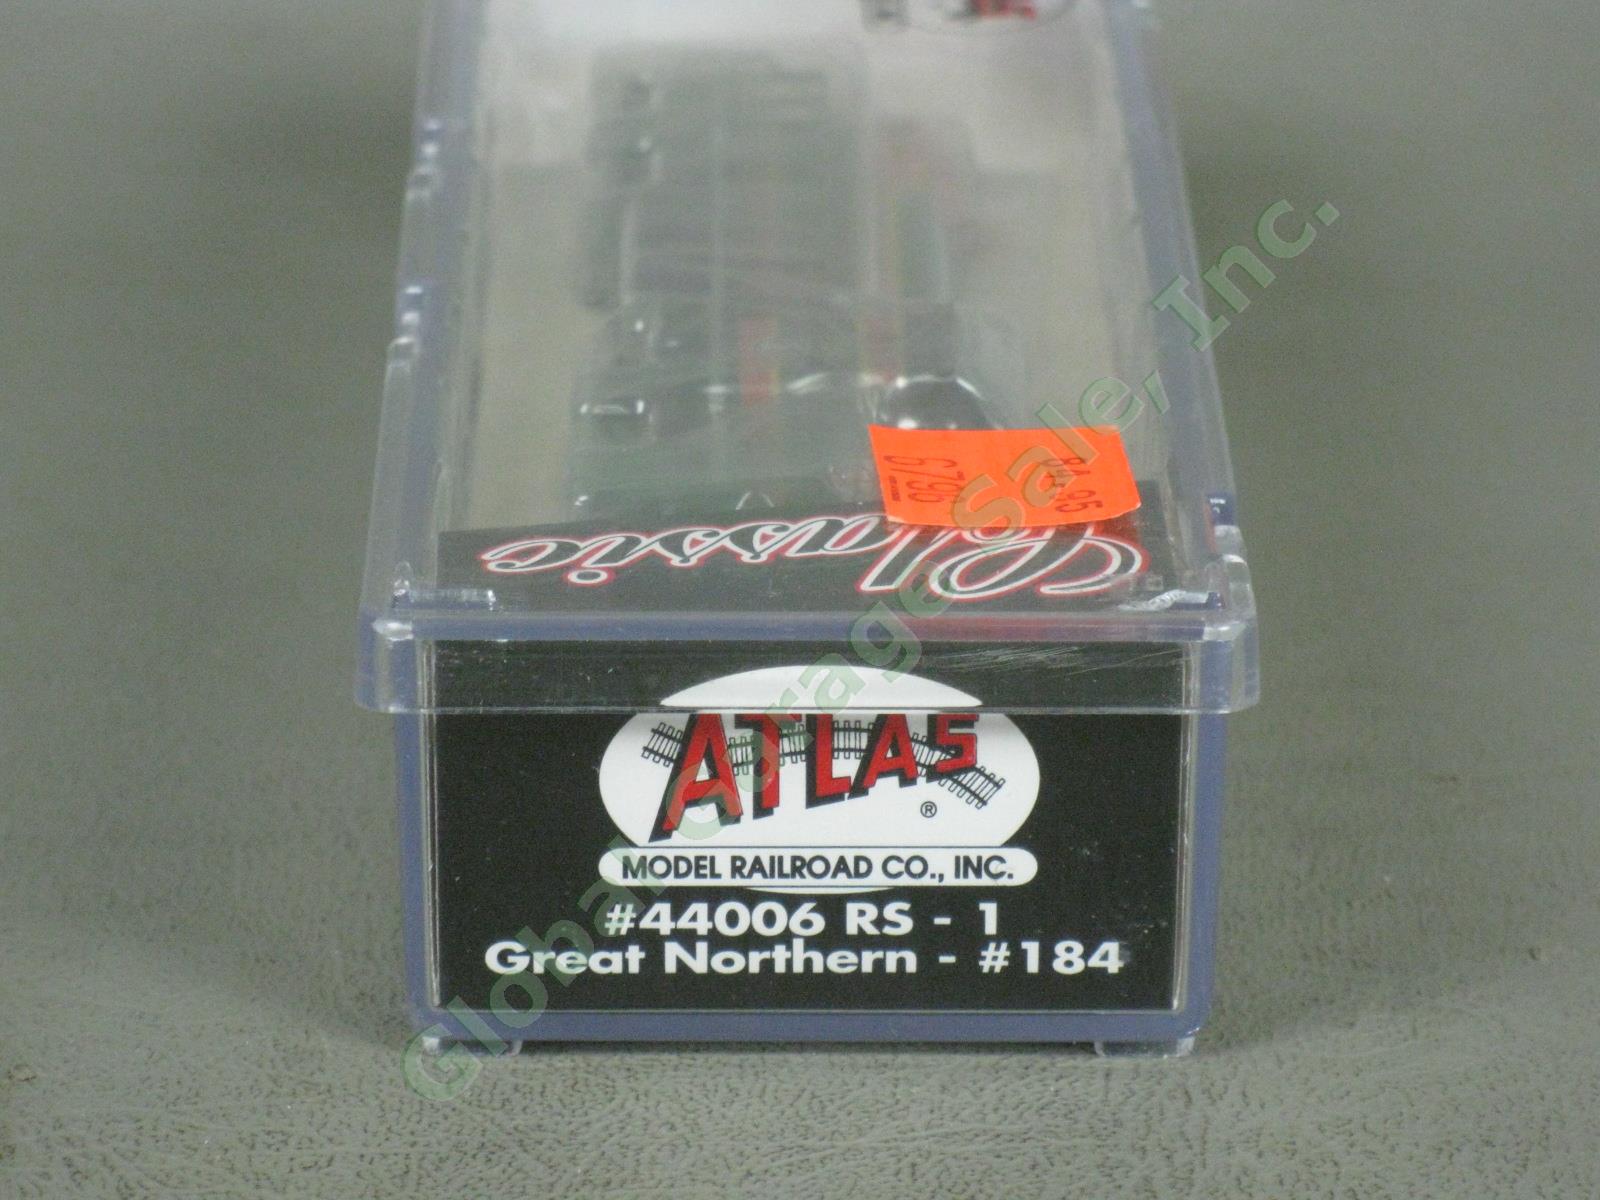 NEW Atlas N-Scale Locomotive 44006 RS-1 Alco Great Northern #184 GN Railroad 4